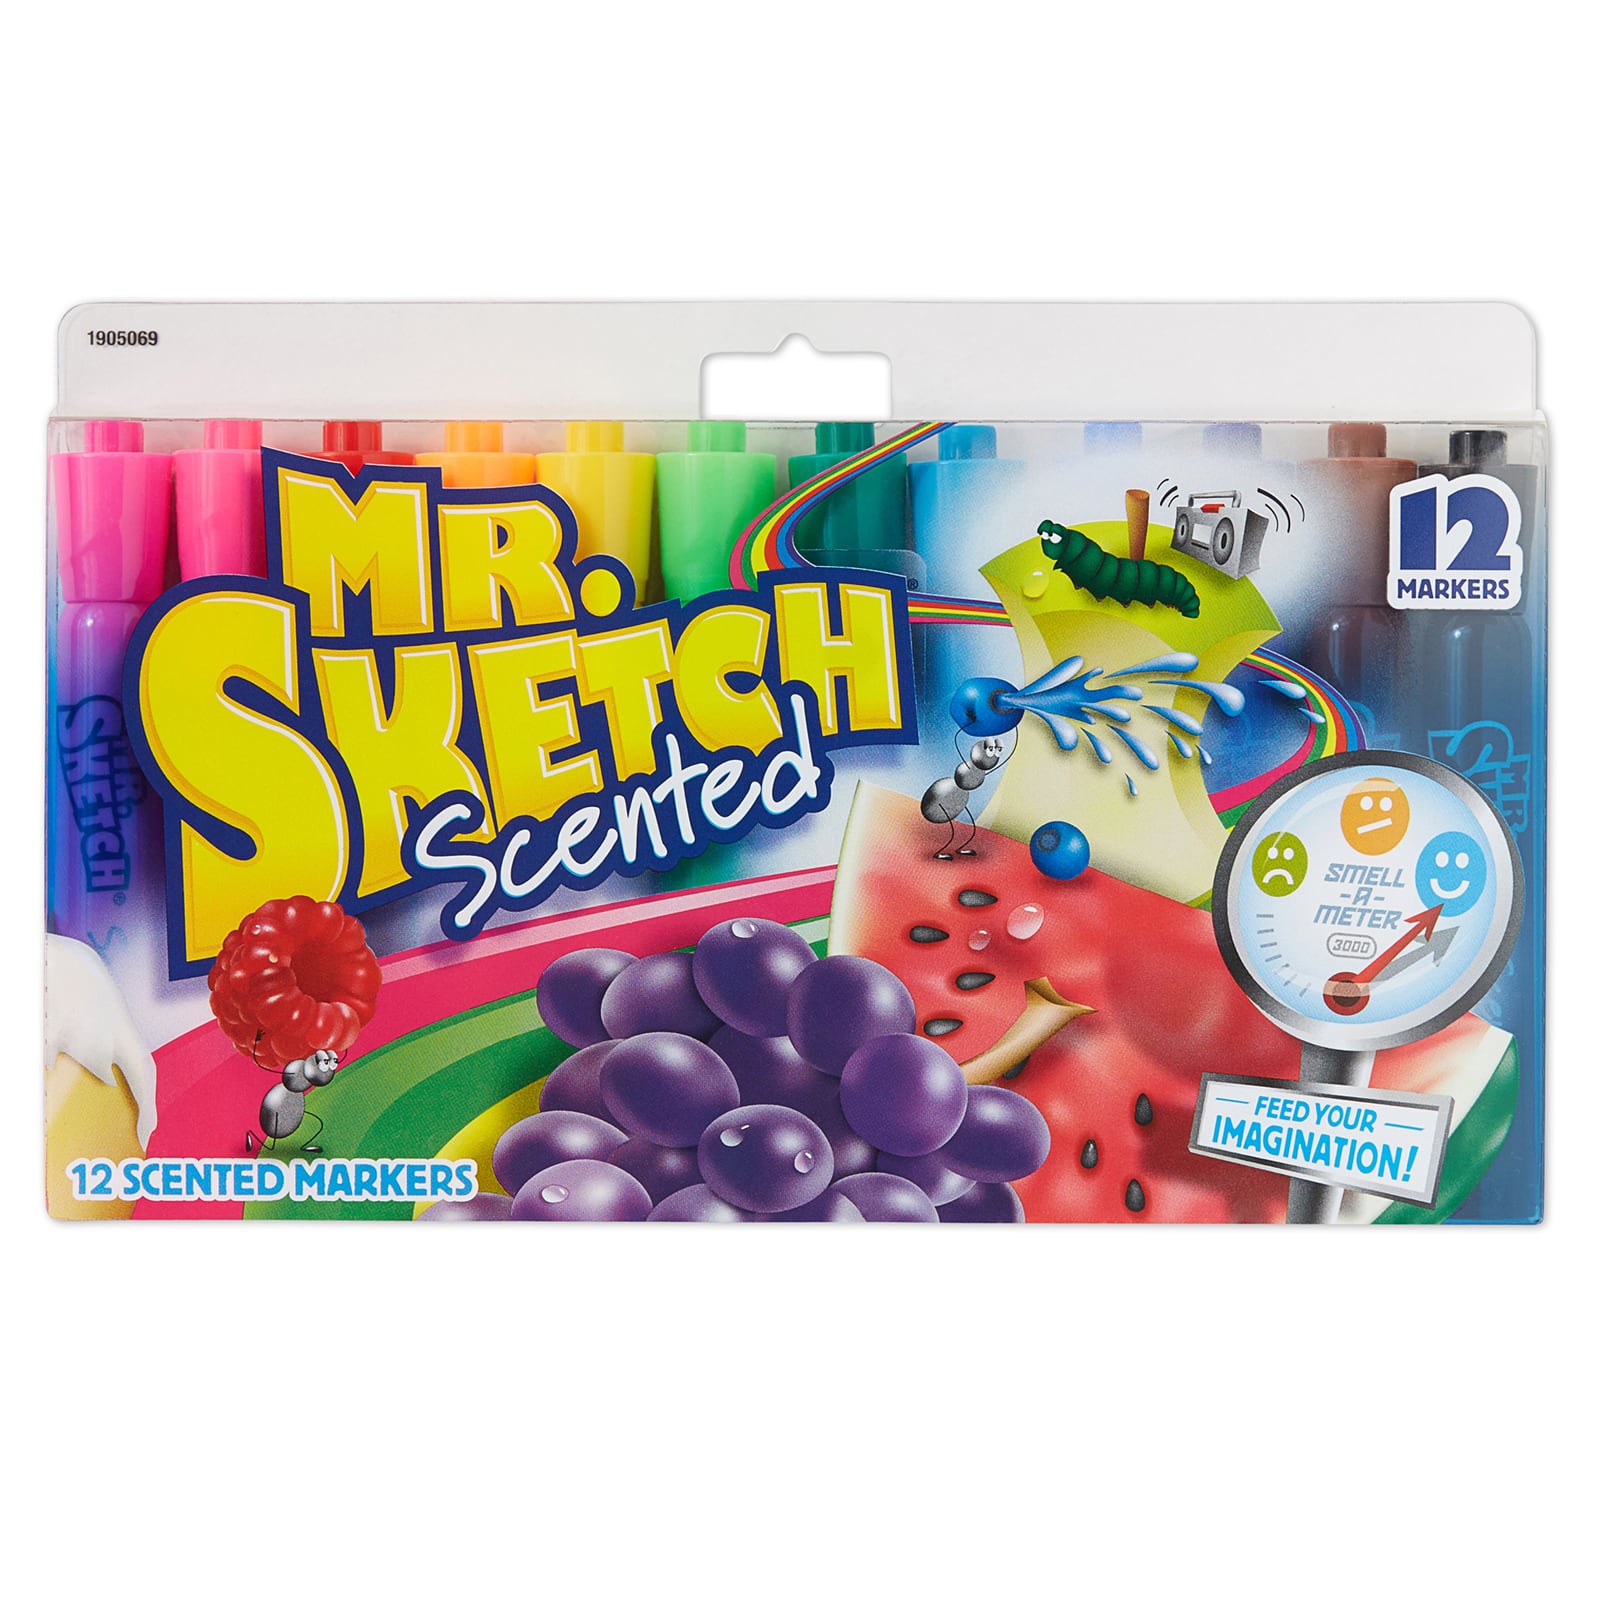  Mr. Sketch Scented Twistable Crayons, 12/Pack : Arts